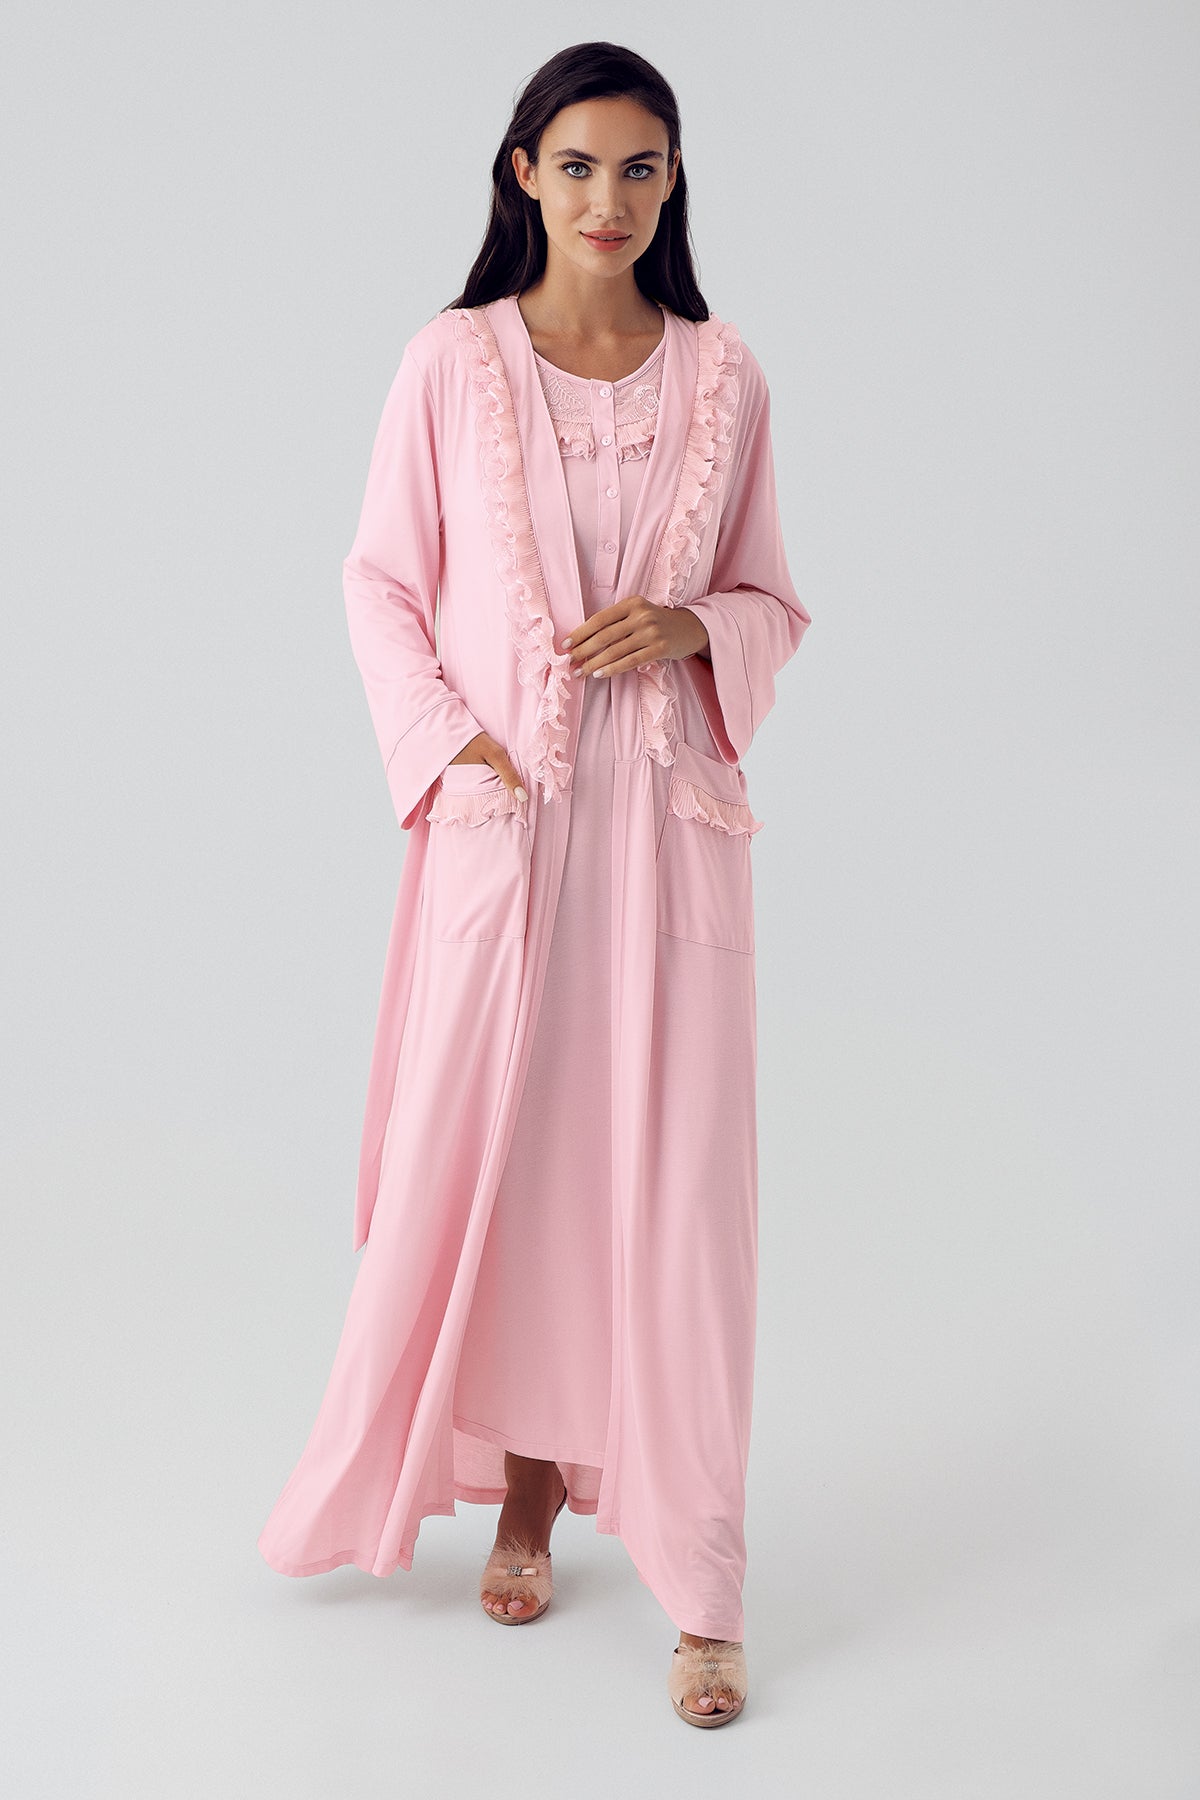 Lace Detailed Maternity & Nursing Nightgown With Robe Powder - 15410